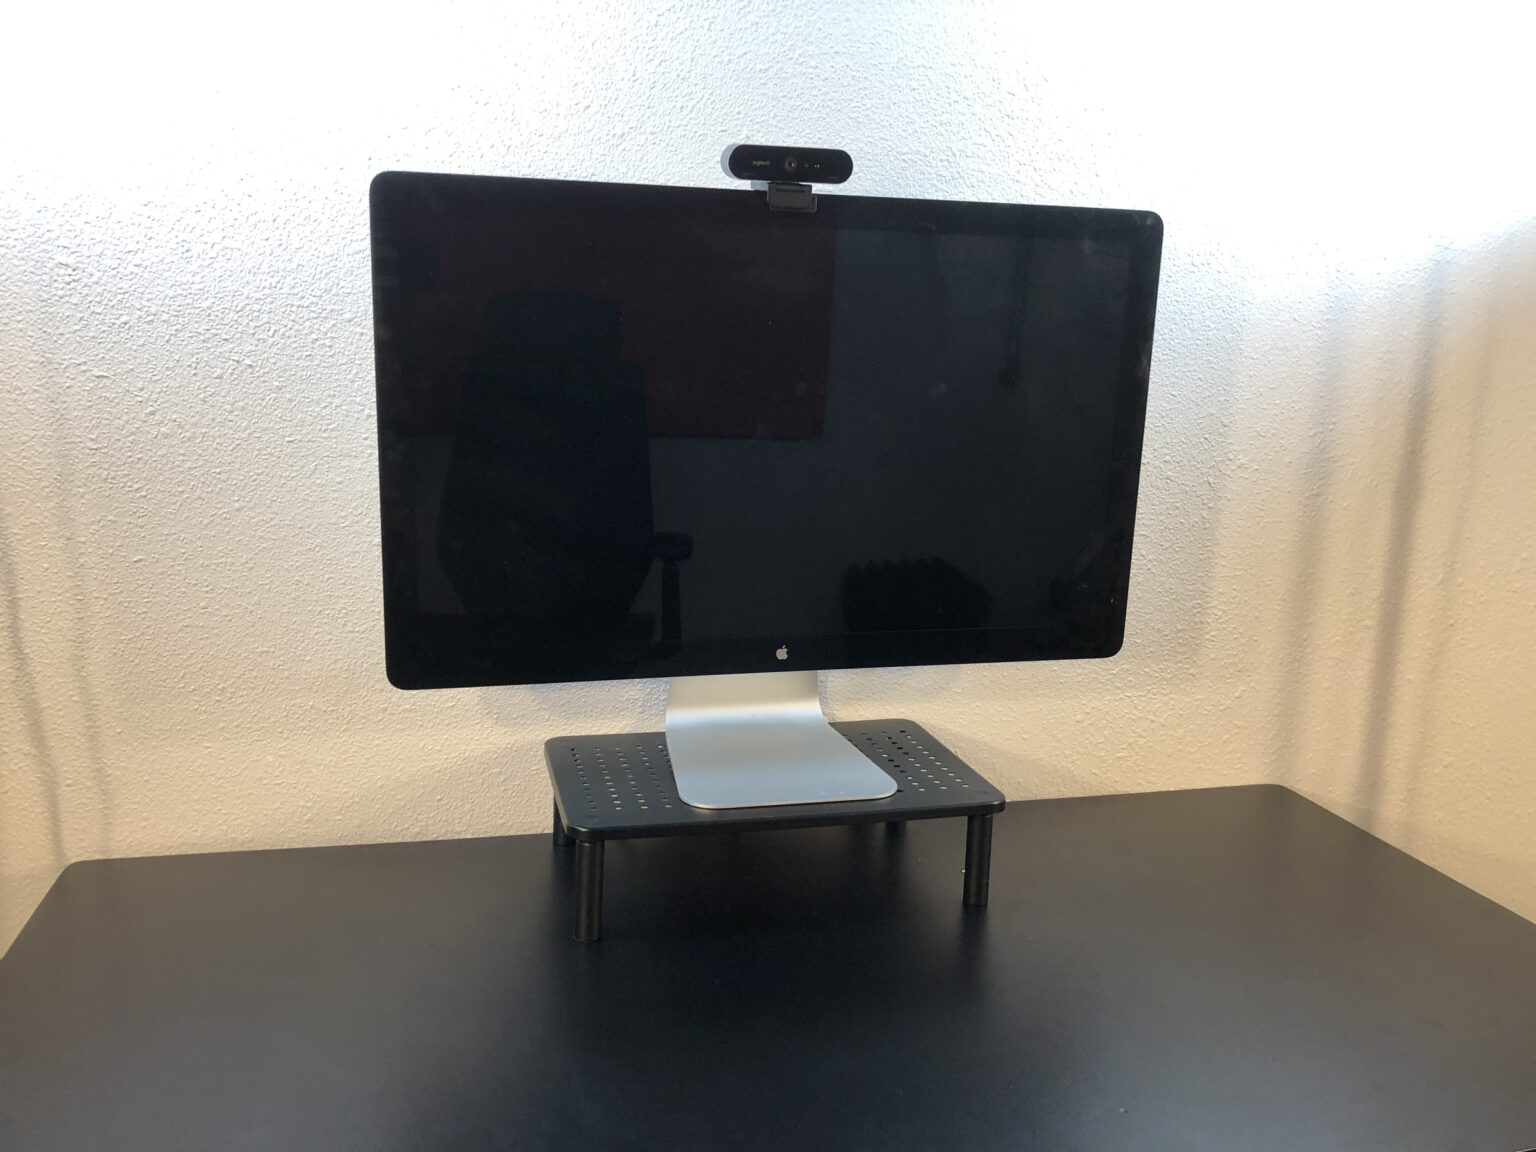 Origami Folding Desk With Monitor 1536x1152 